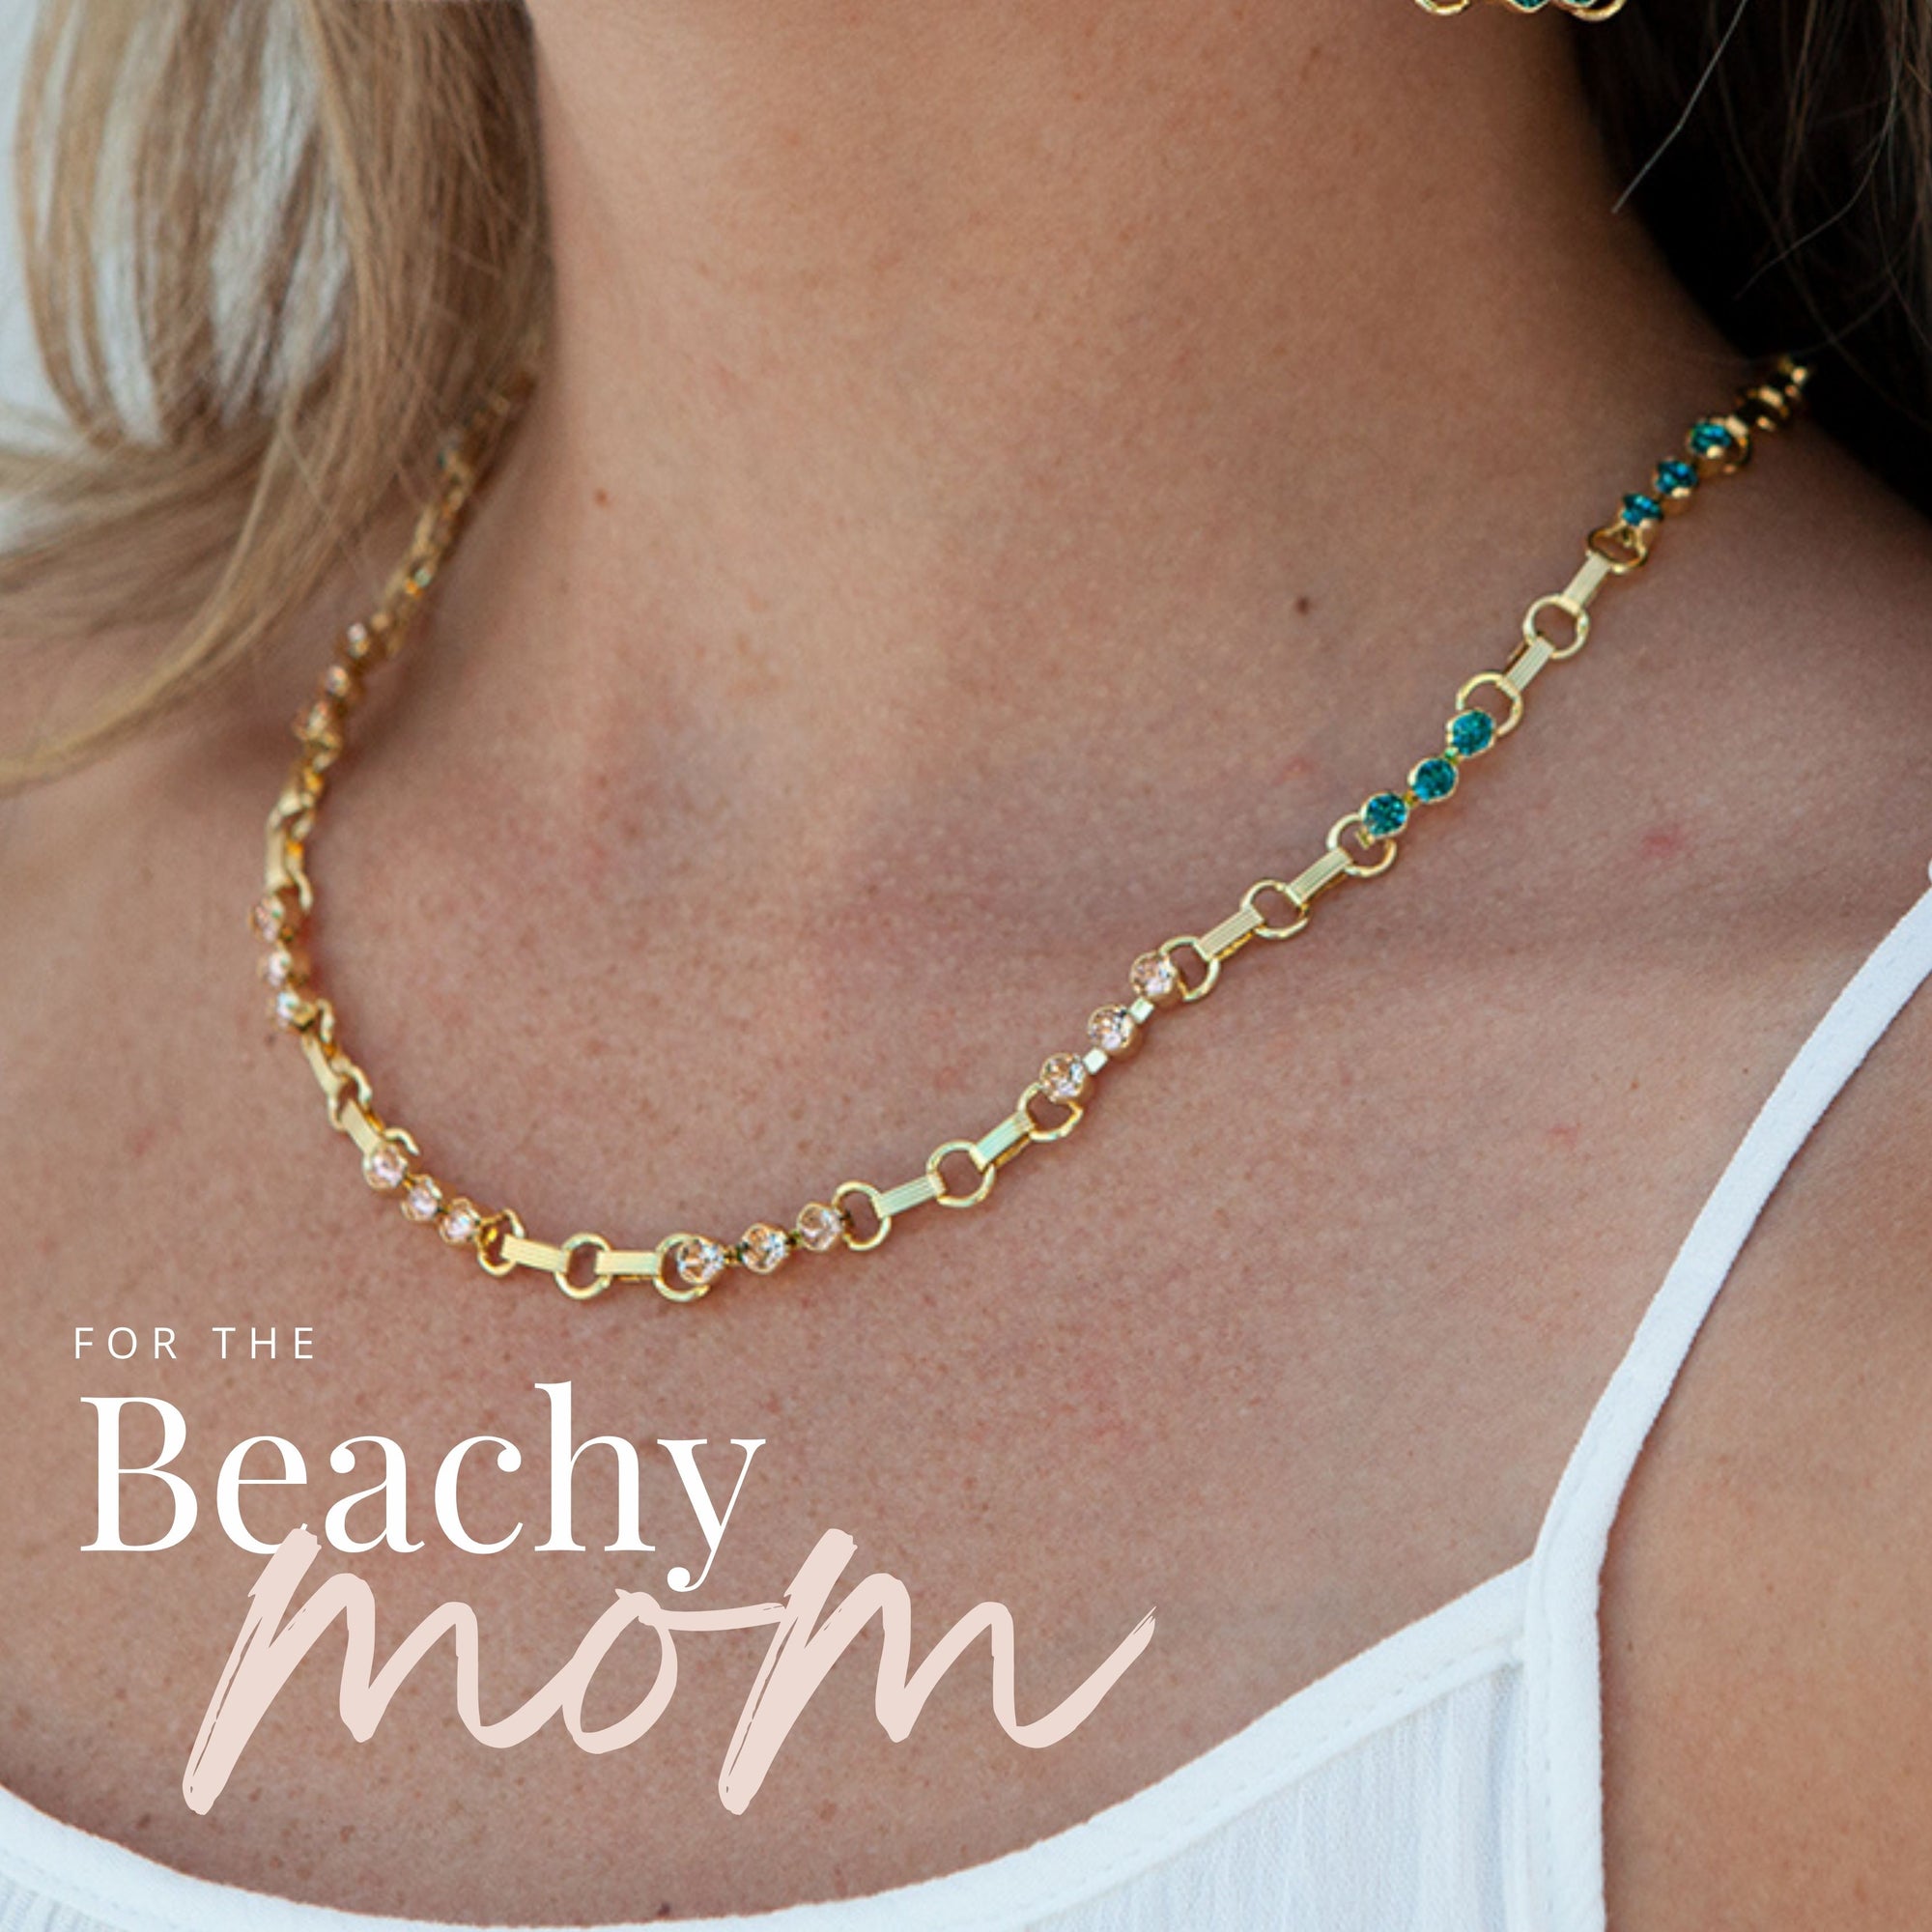 For the Beachy Mom